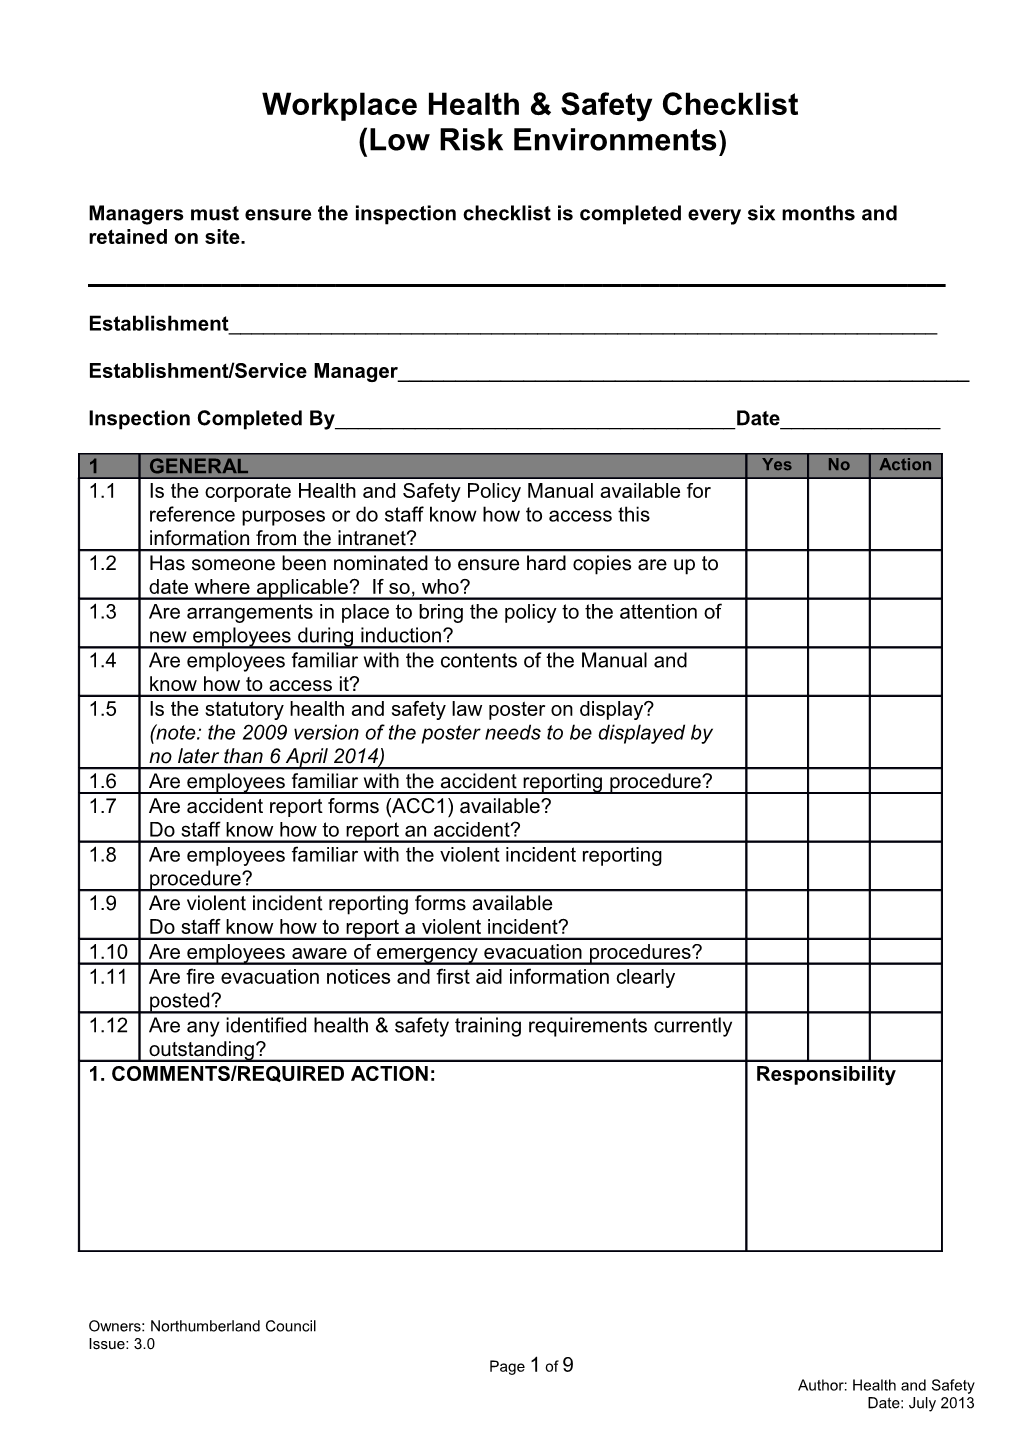 Workplace Inspection Checklist for Low Risk Environments